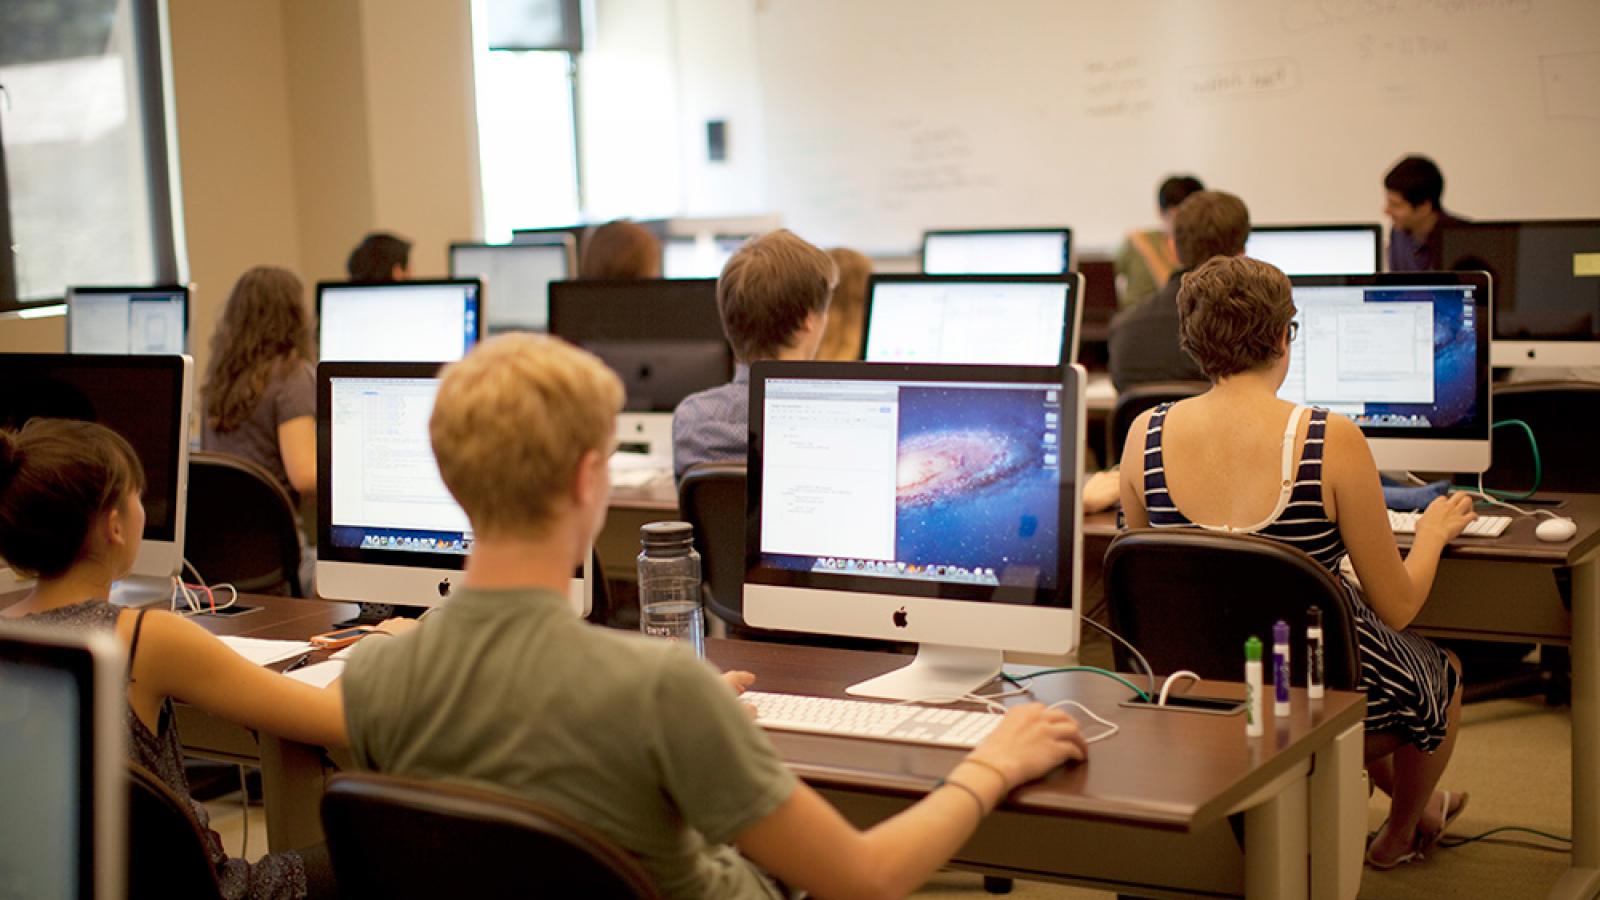 Intro to Computer Science is a popular class for majors and non-majors alike.